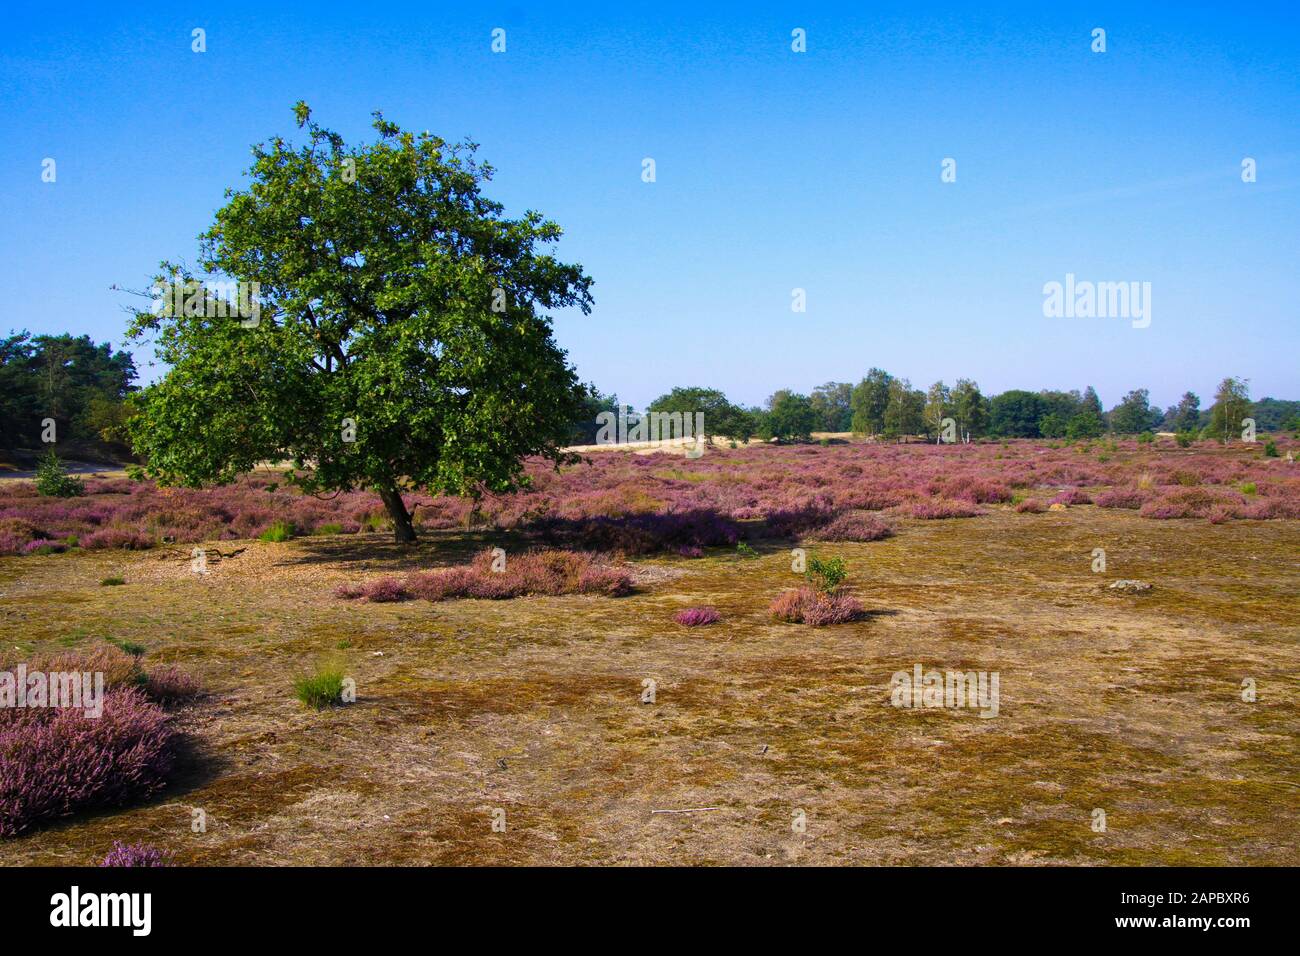 View over grass field with purple blooming heather erica flowers and isolated oak tree against blue sky - Loonse und Drunense Duinen, Netherlands Stock Photo